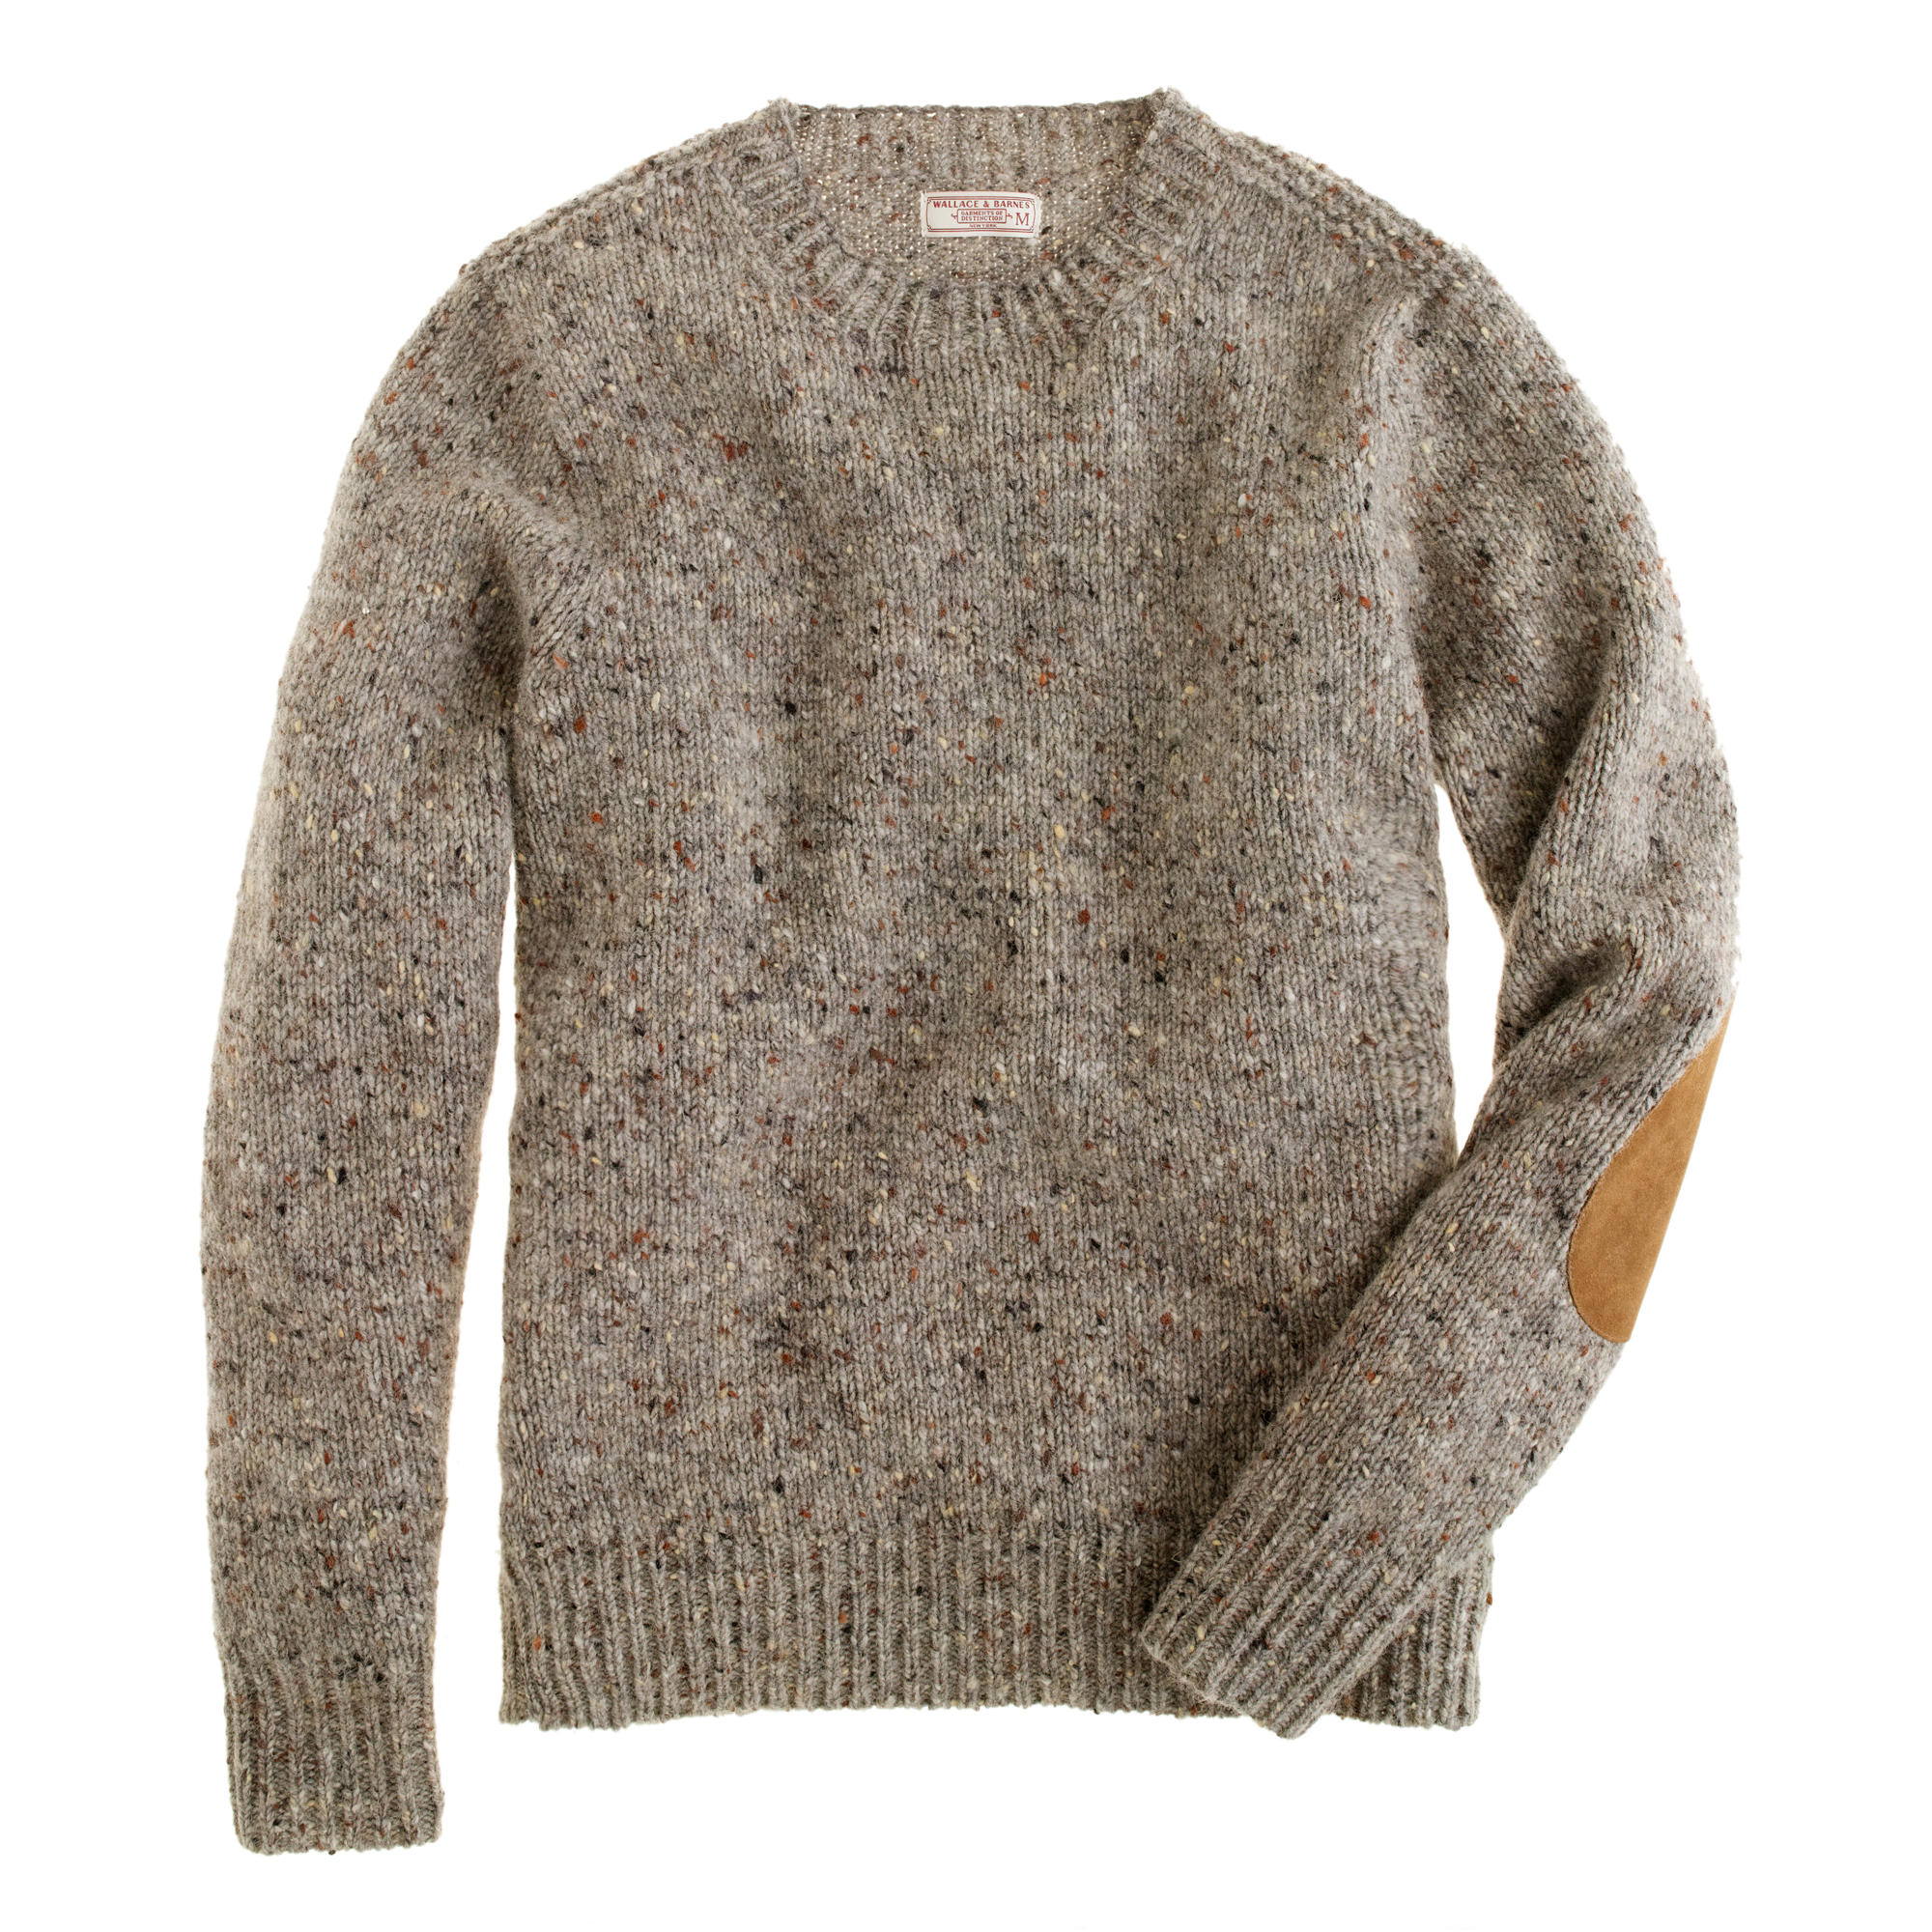 Lyst - J.Crew Wallace & Barnes Donegal Wool Sweater in Natural for Men